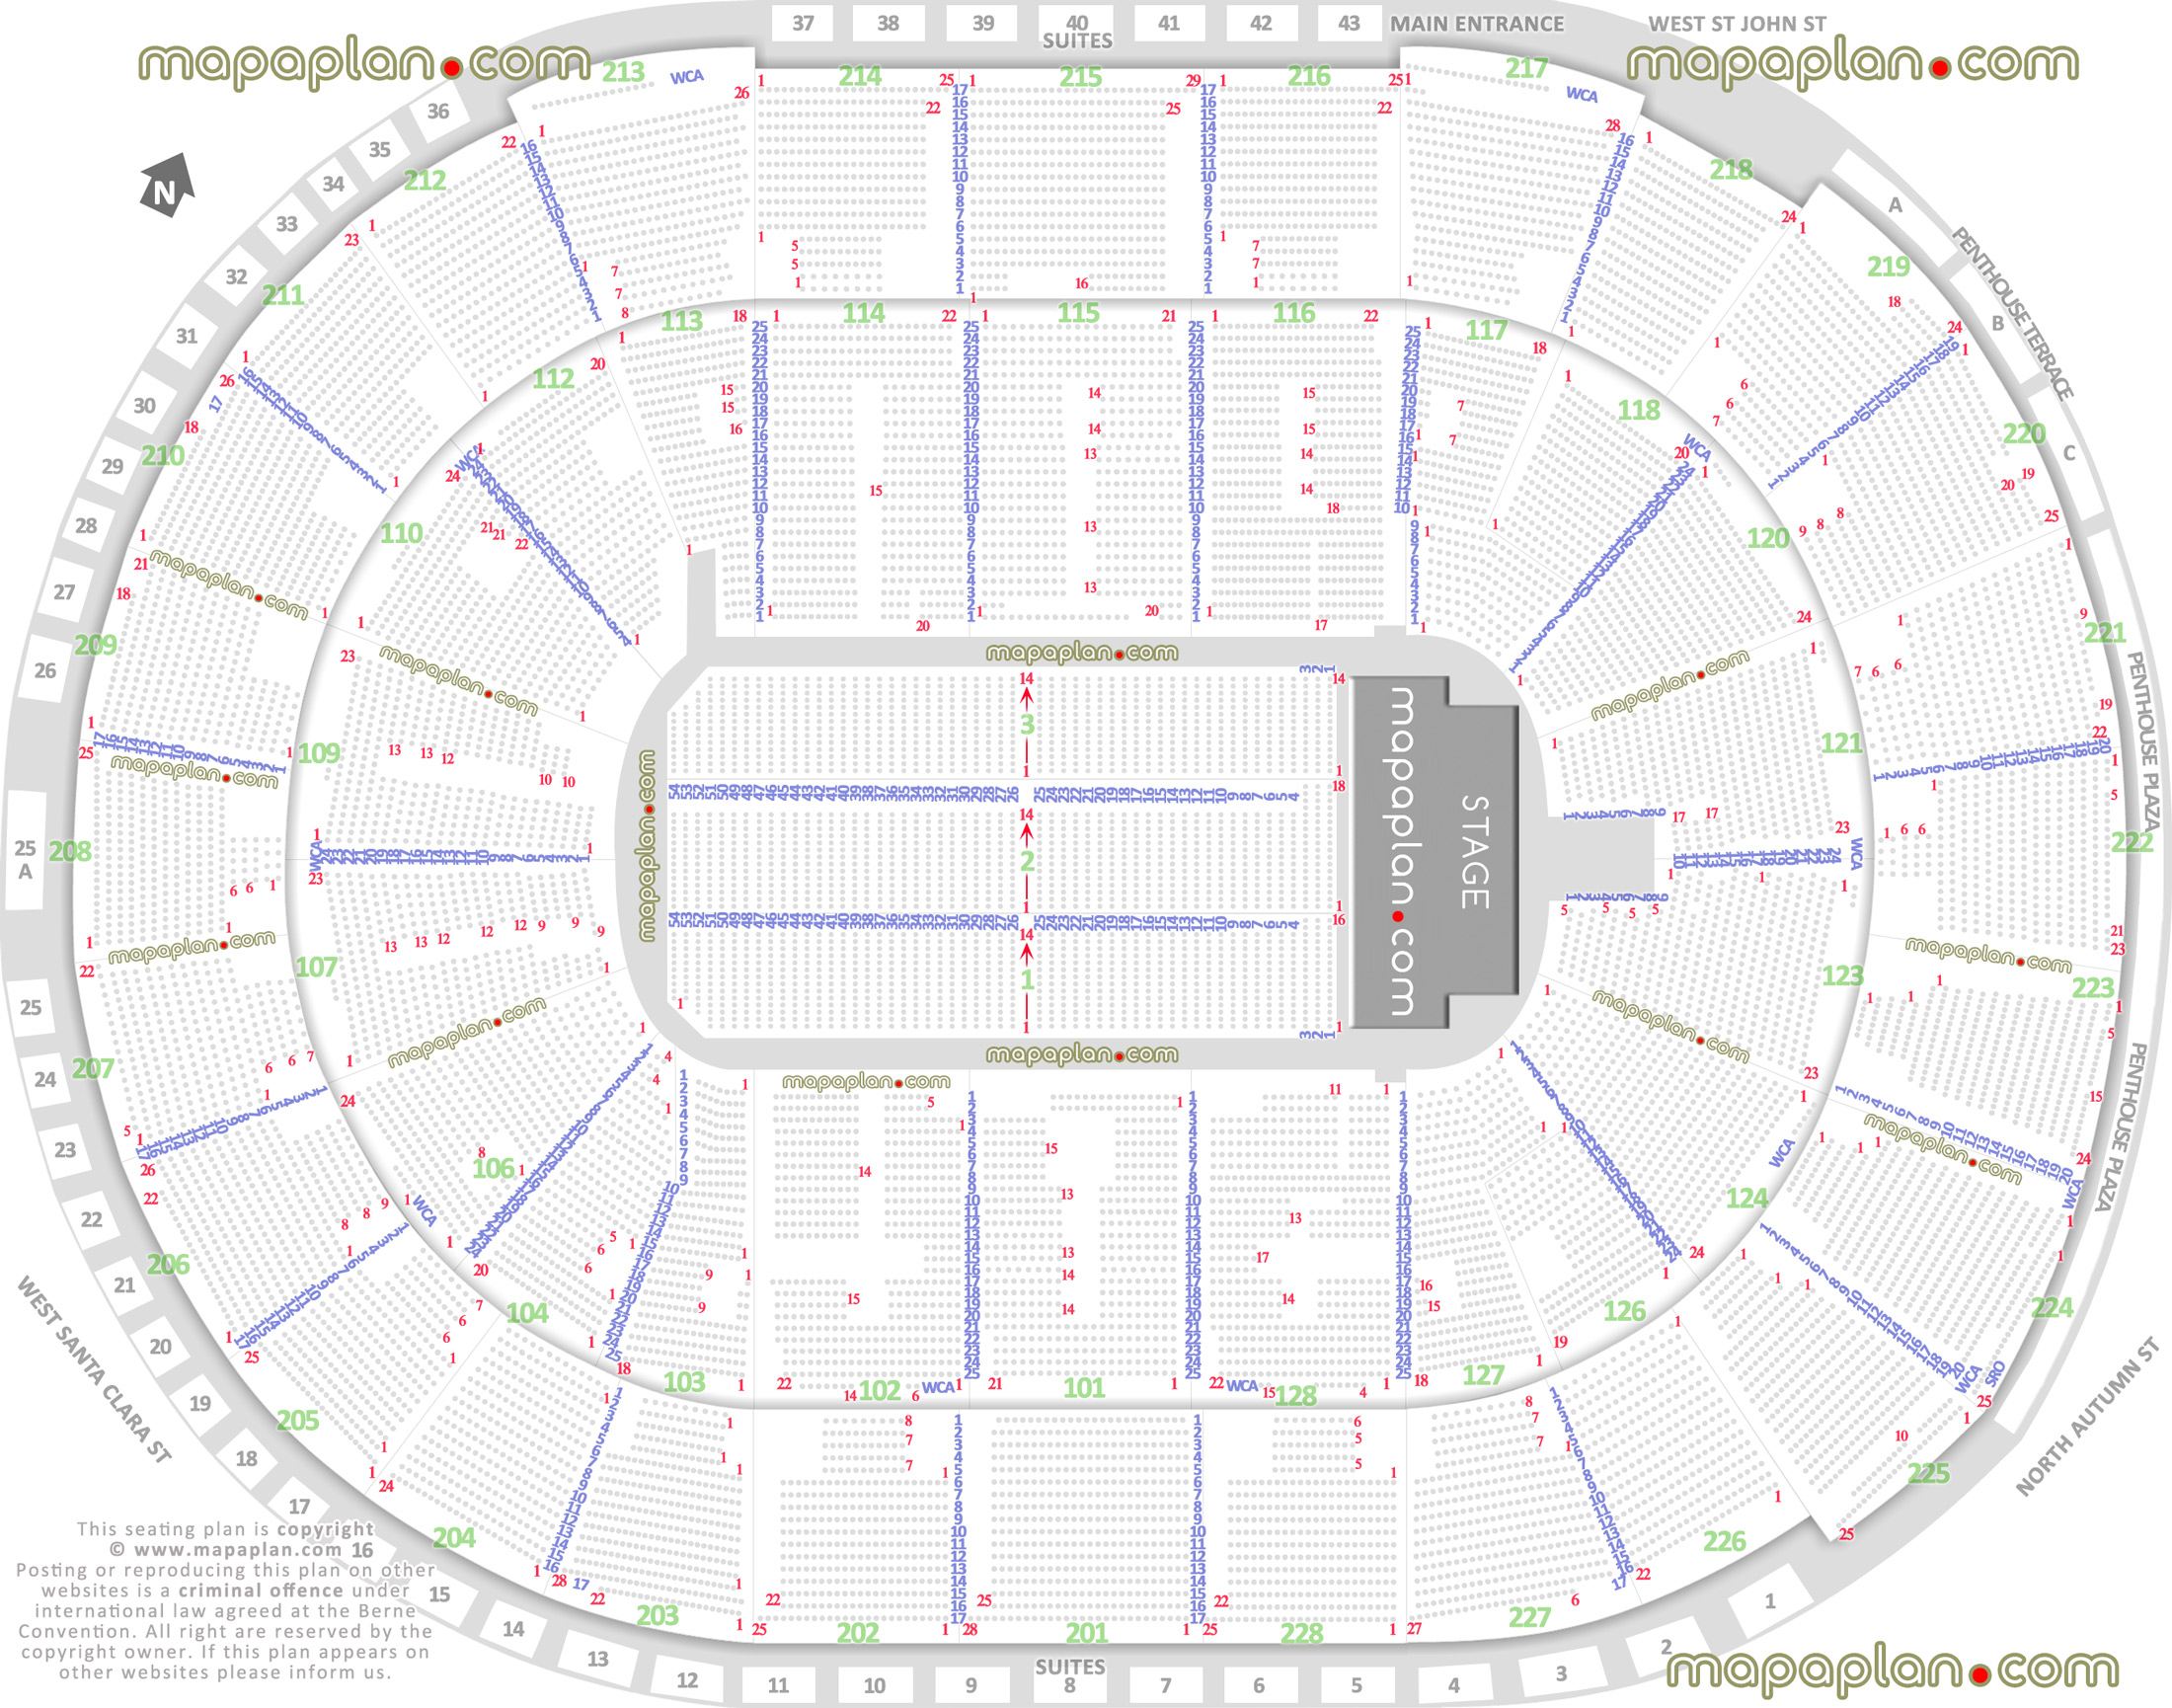 SAP Center seat & row numbers detailed seating chart, San ...